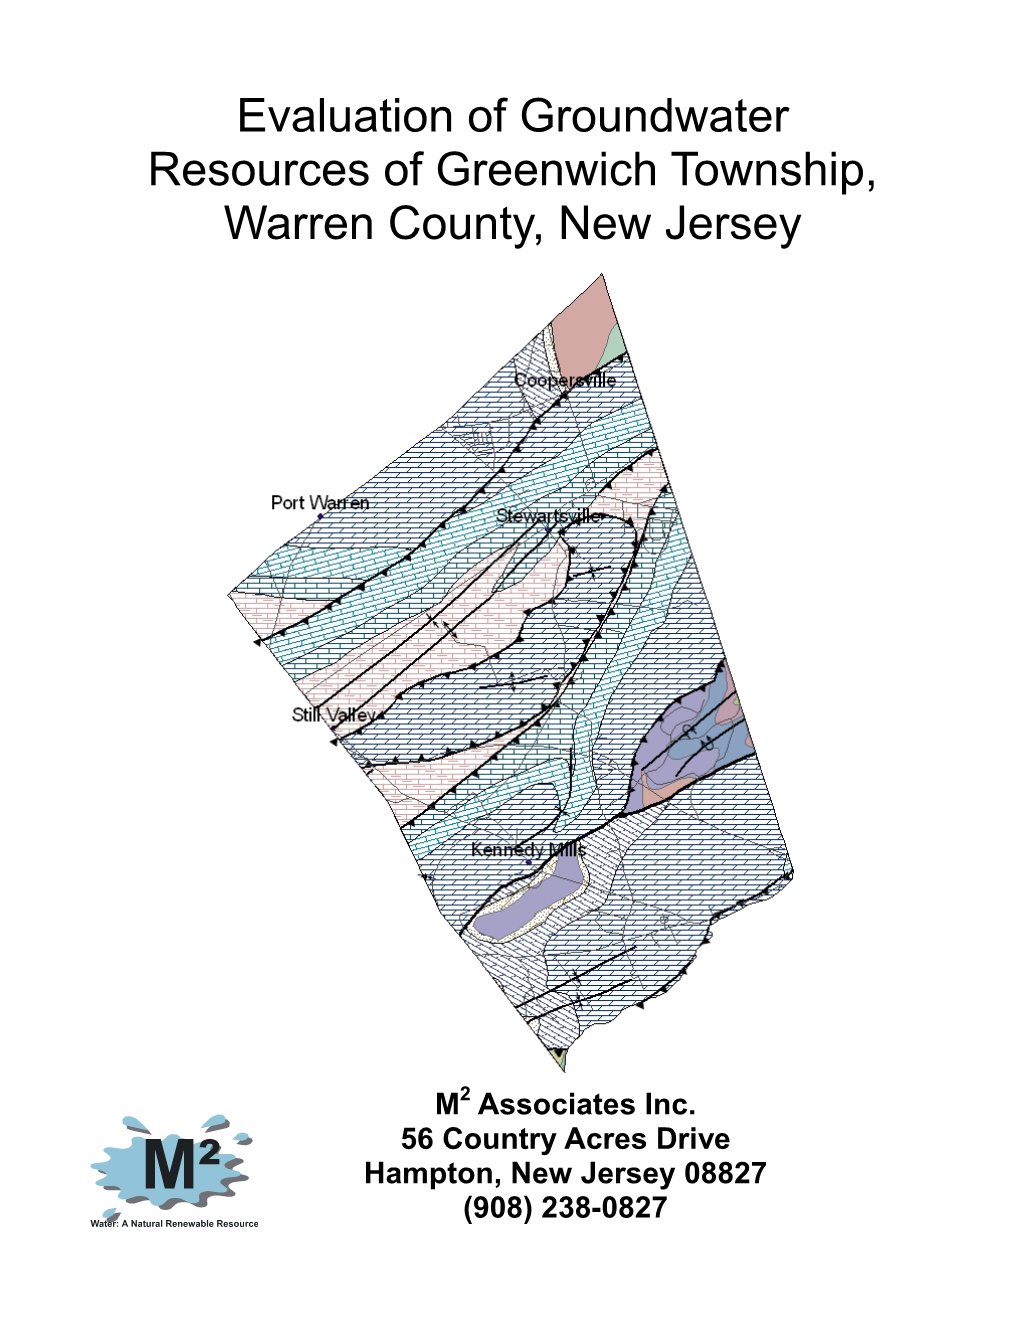 Evaluation of Groundwater Resources of Greenwich Township, Warren County, New Jersey